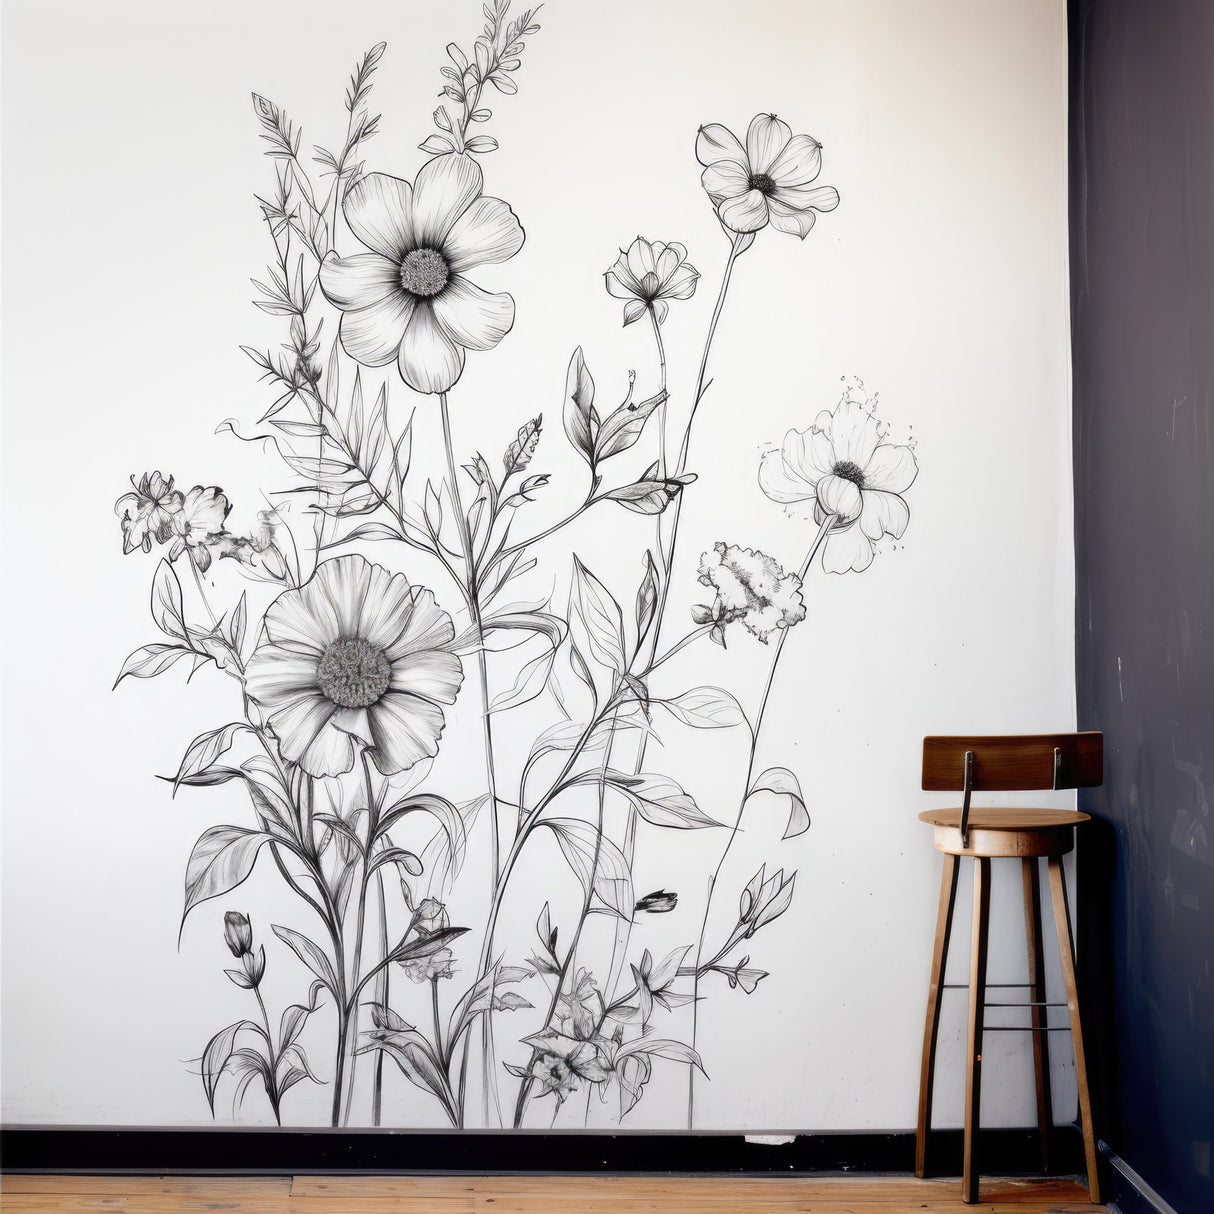 Elegant Monochrome Botanical Wall Sticker - Black Detailed Floral and Foliage Illustration Decal for Sophisticated Decor